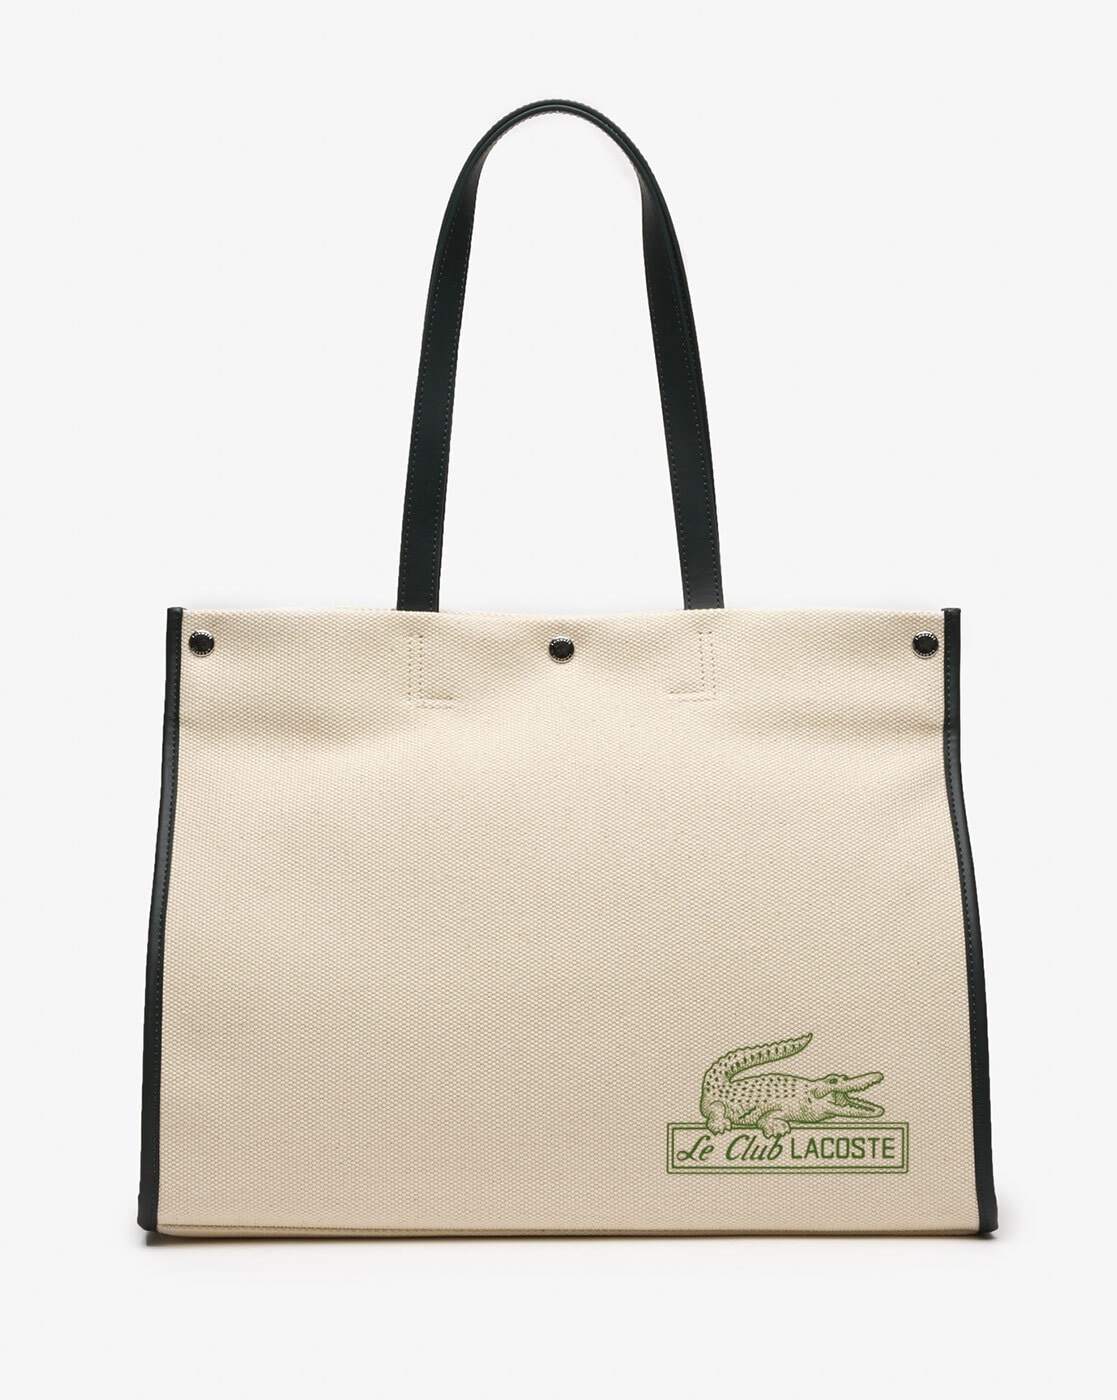 Lacoste Women's Bag Cream 100% Other